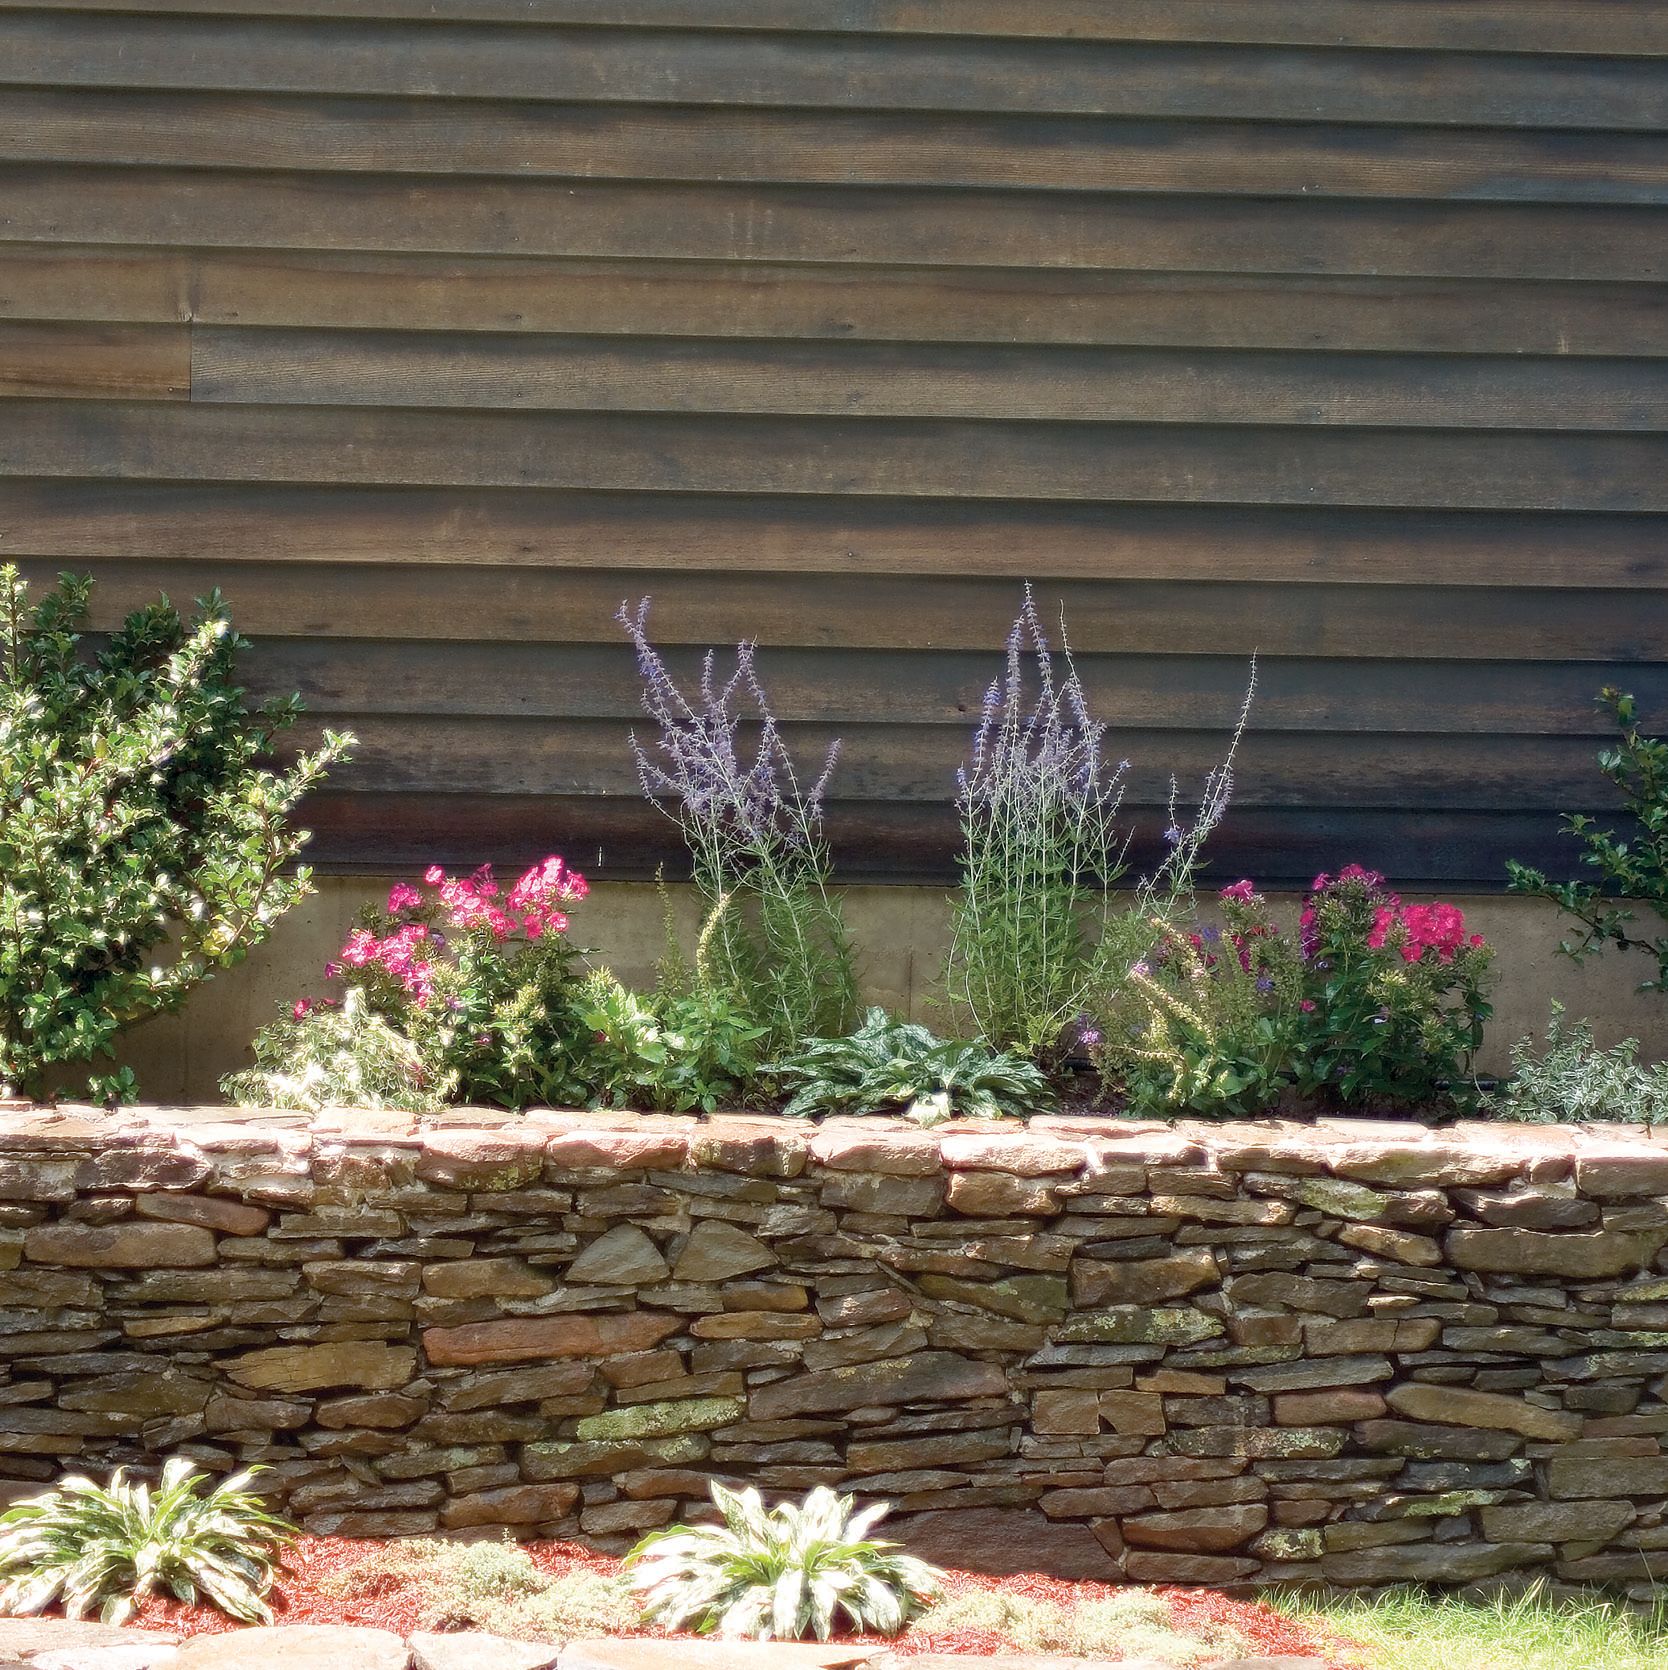 How To Build a Stone Wall That's Stylish and Functional